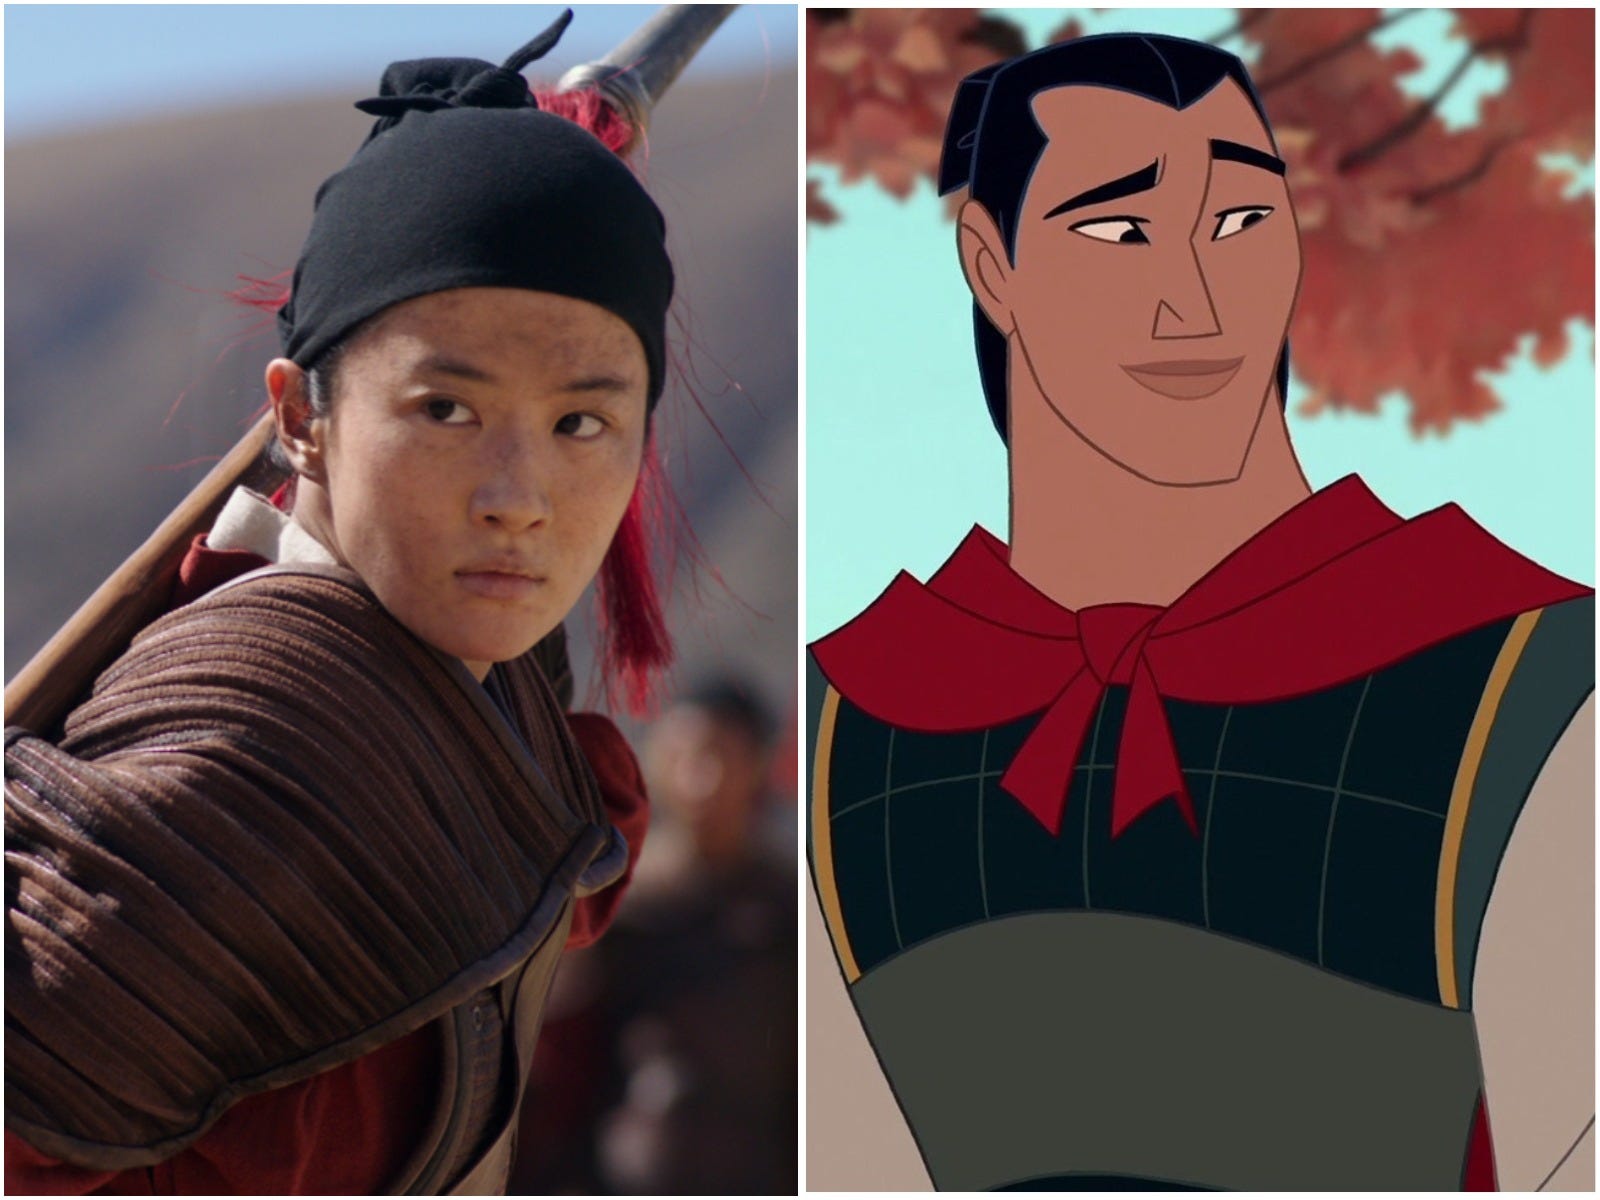 Cutting bisexual icon Li Shang from the 'Mulan' remake was ...